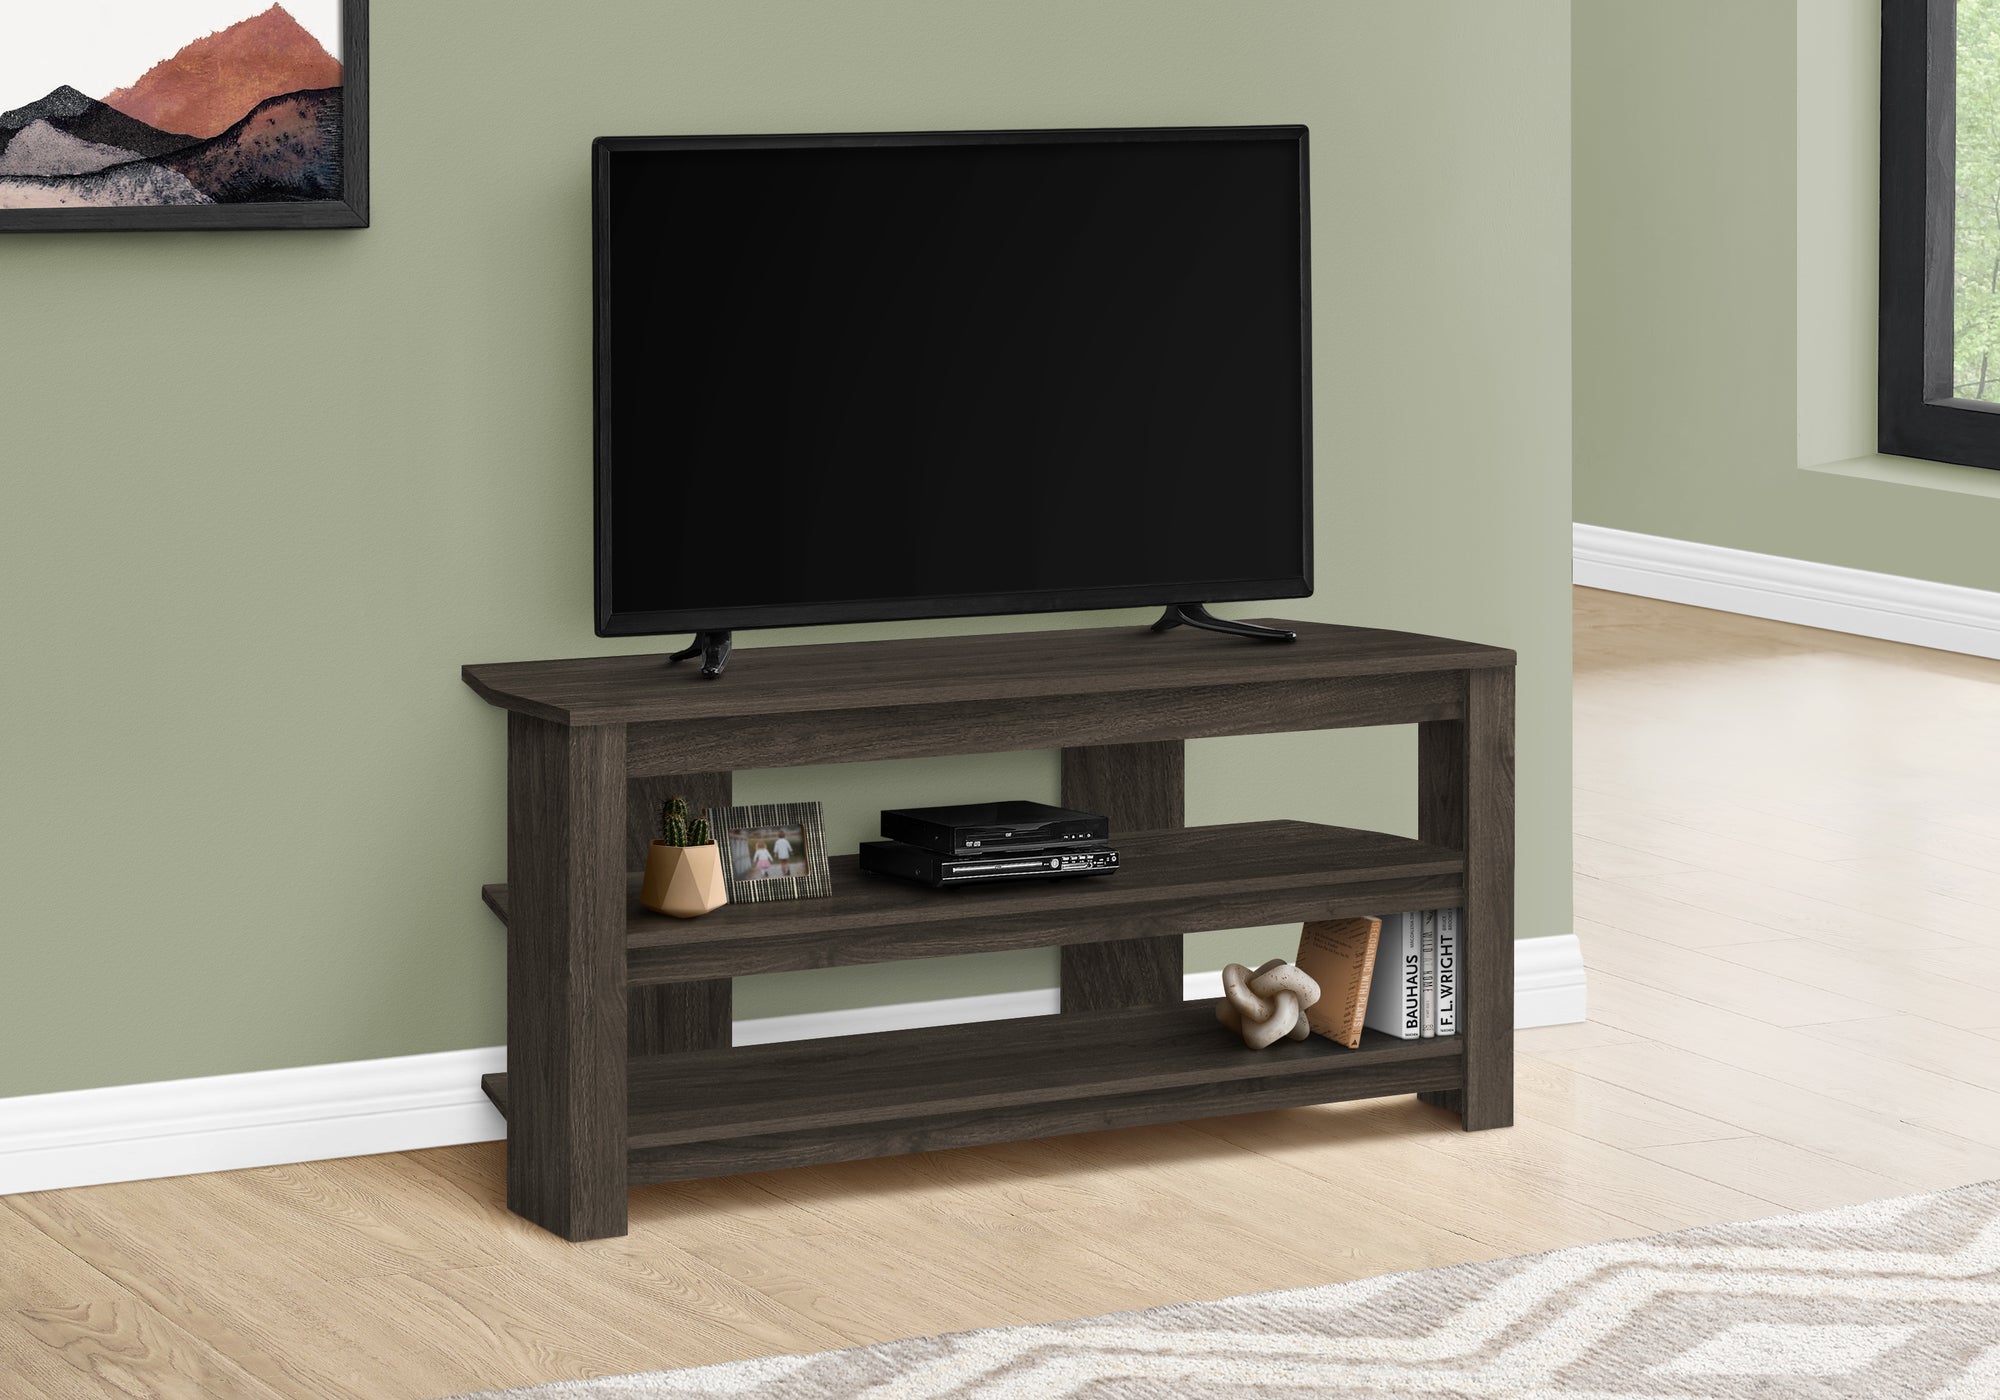 MN-522514    Tv Stand, 42 Inch, Console, Media Entertainment Center, Storage Cabinet, Living Room, Bedroom, Laminate, Brown Oak, Contemporary, Modern